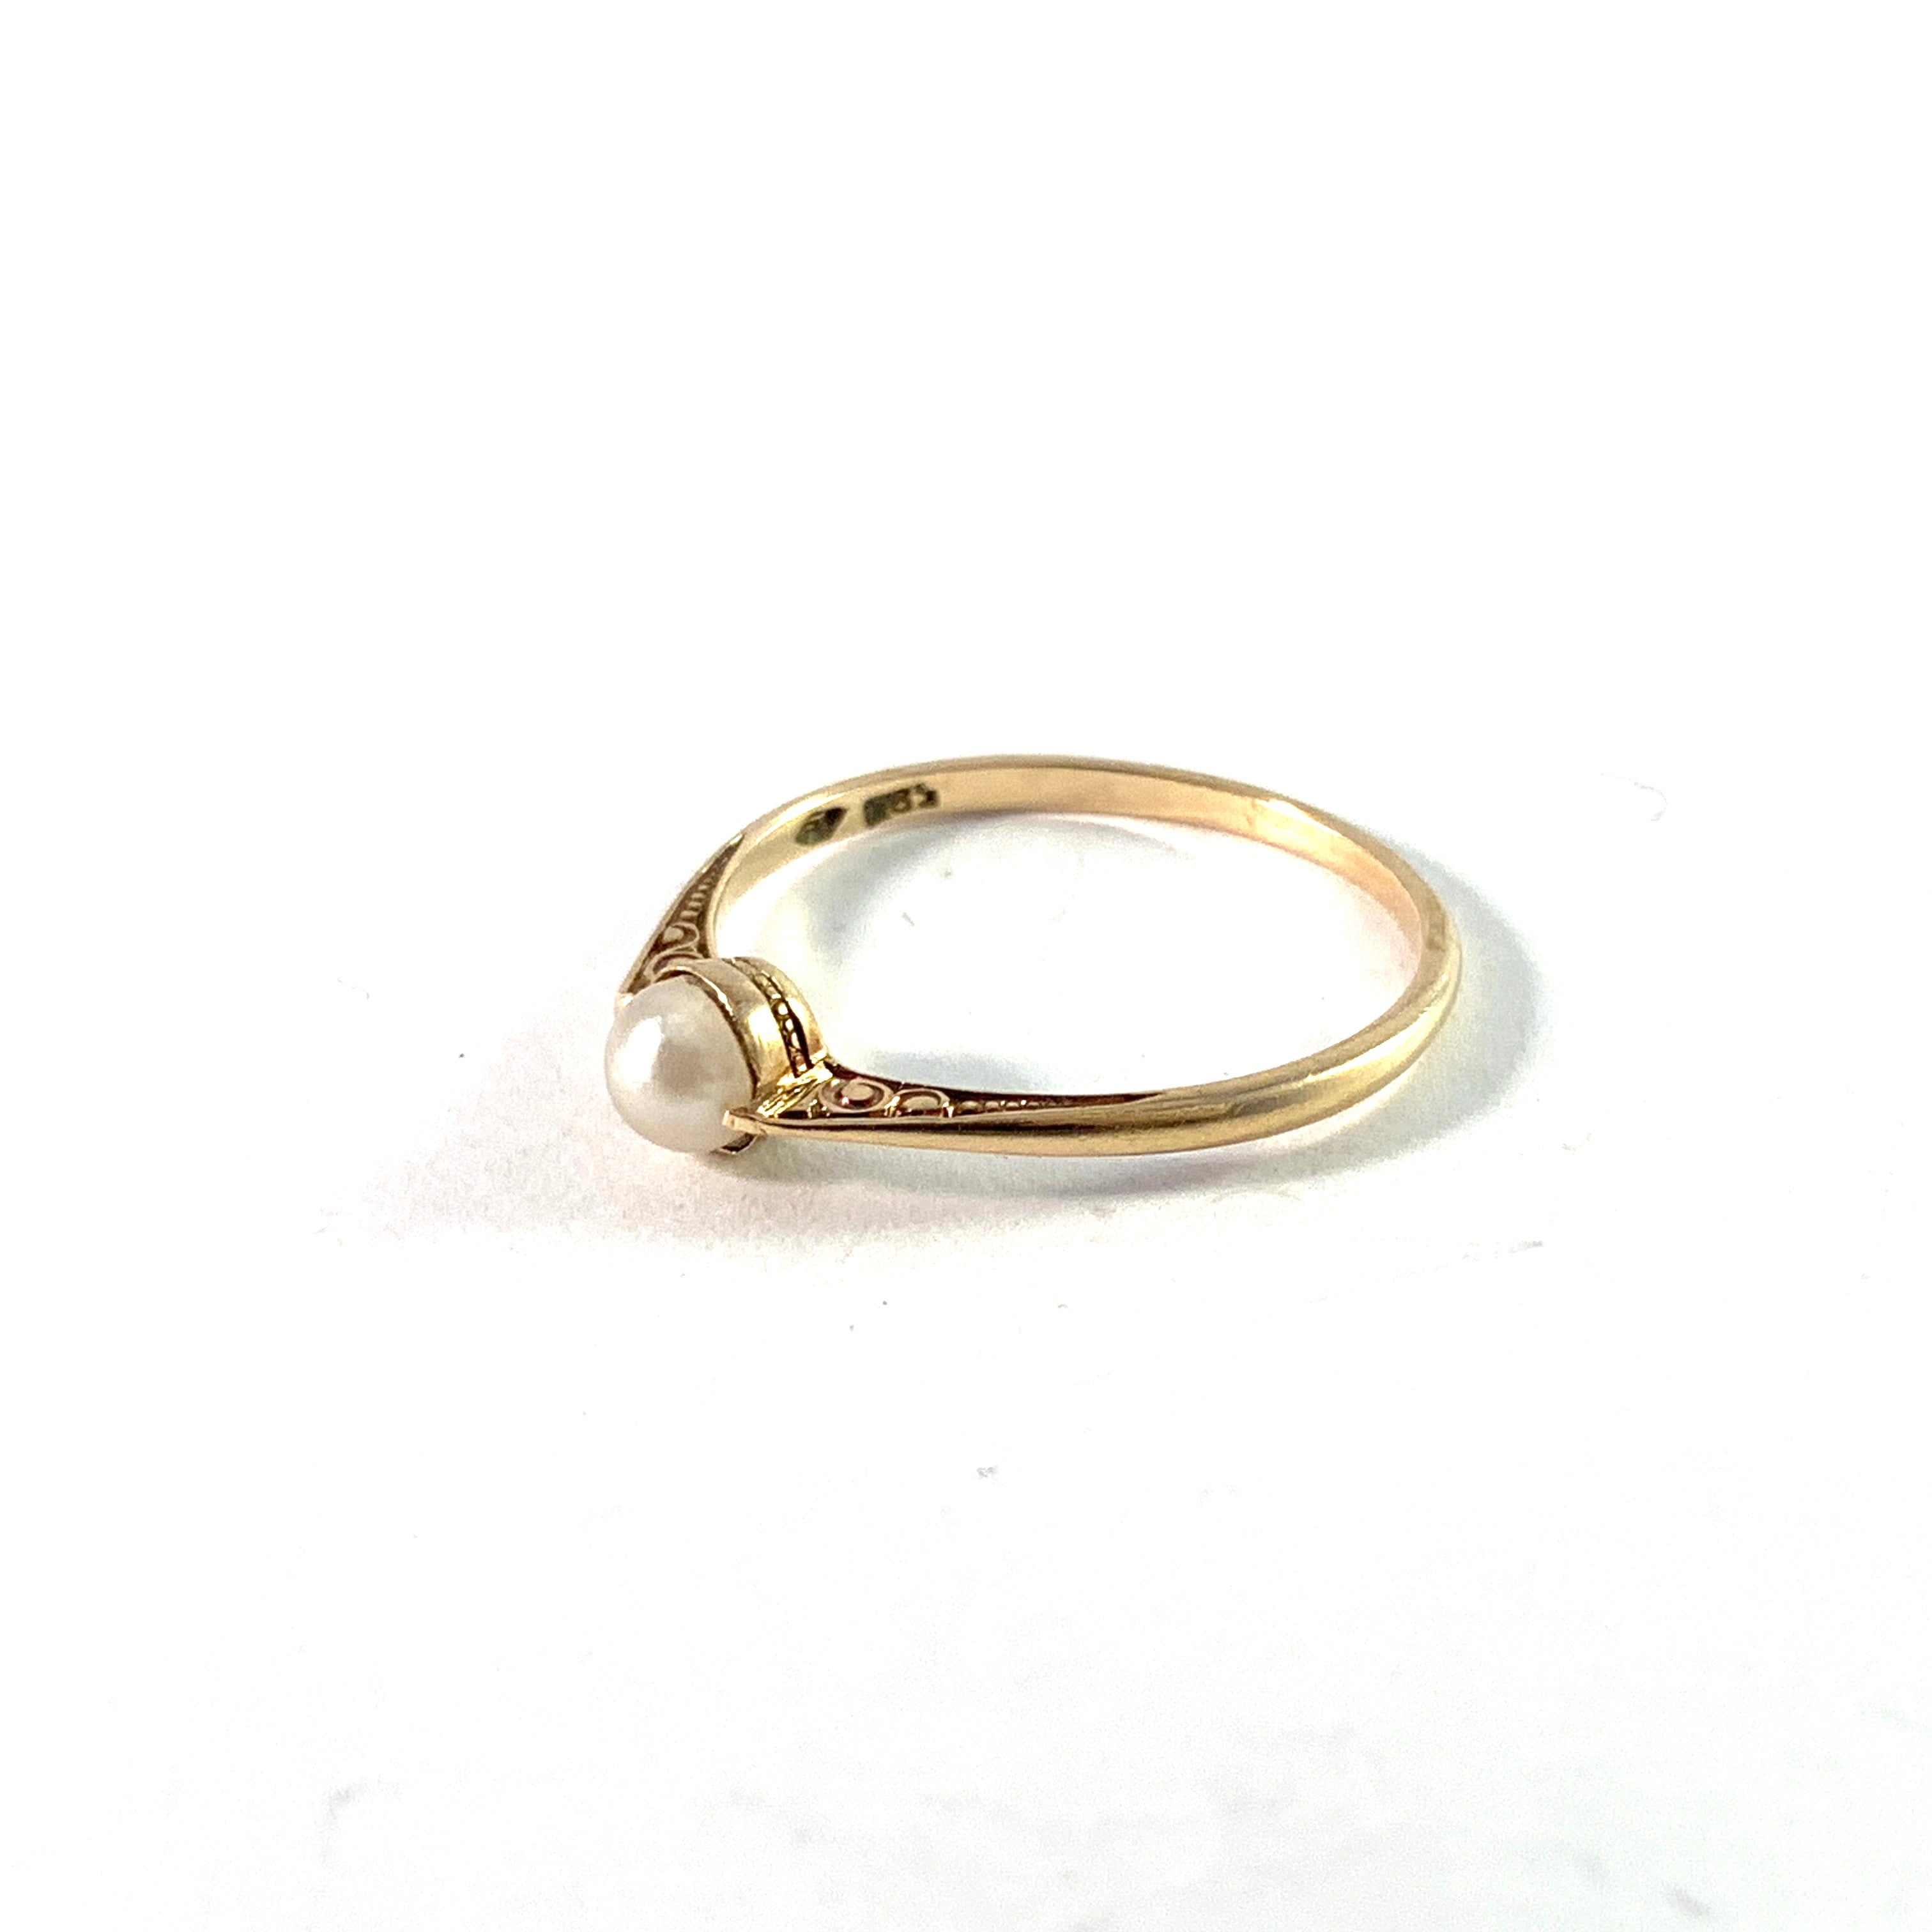 Early to mid 1900s. 14k Gold Cultured Pearl Ring. Prob France.